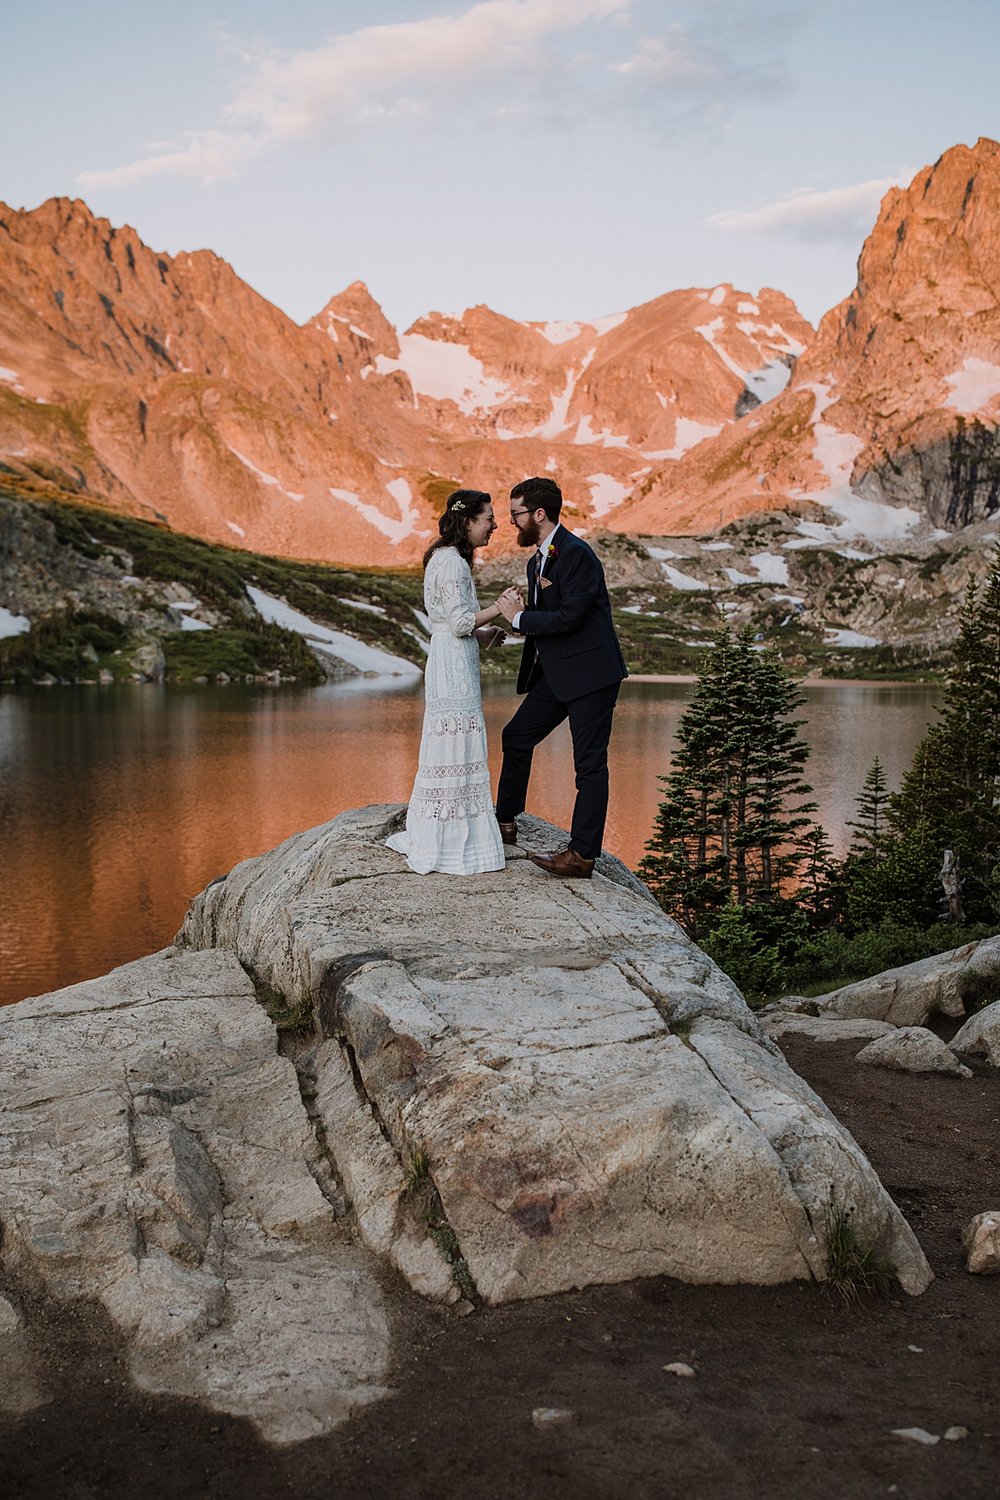 bride and groom sunrise vows, colorado mountain alpenglow, sunrise in the indian peaks wilderness, intimate elopement ceremony, rocky mountain sunrise, pink mountains